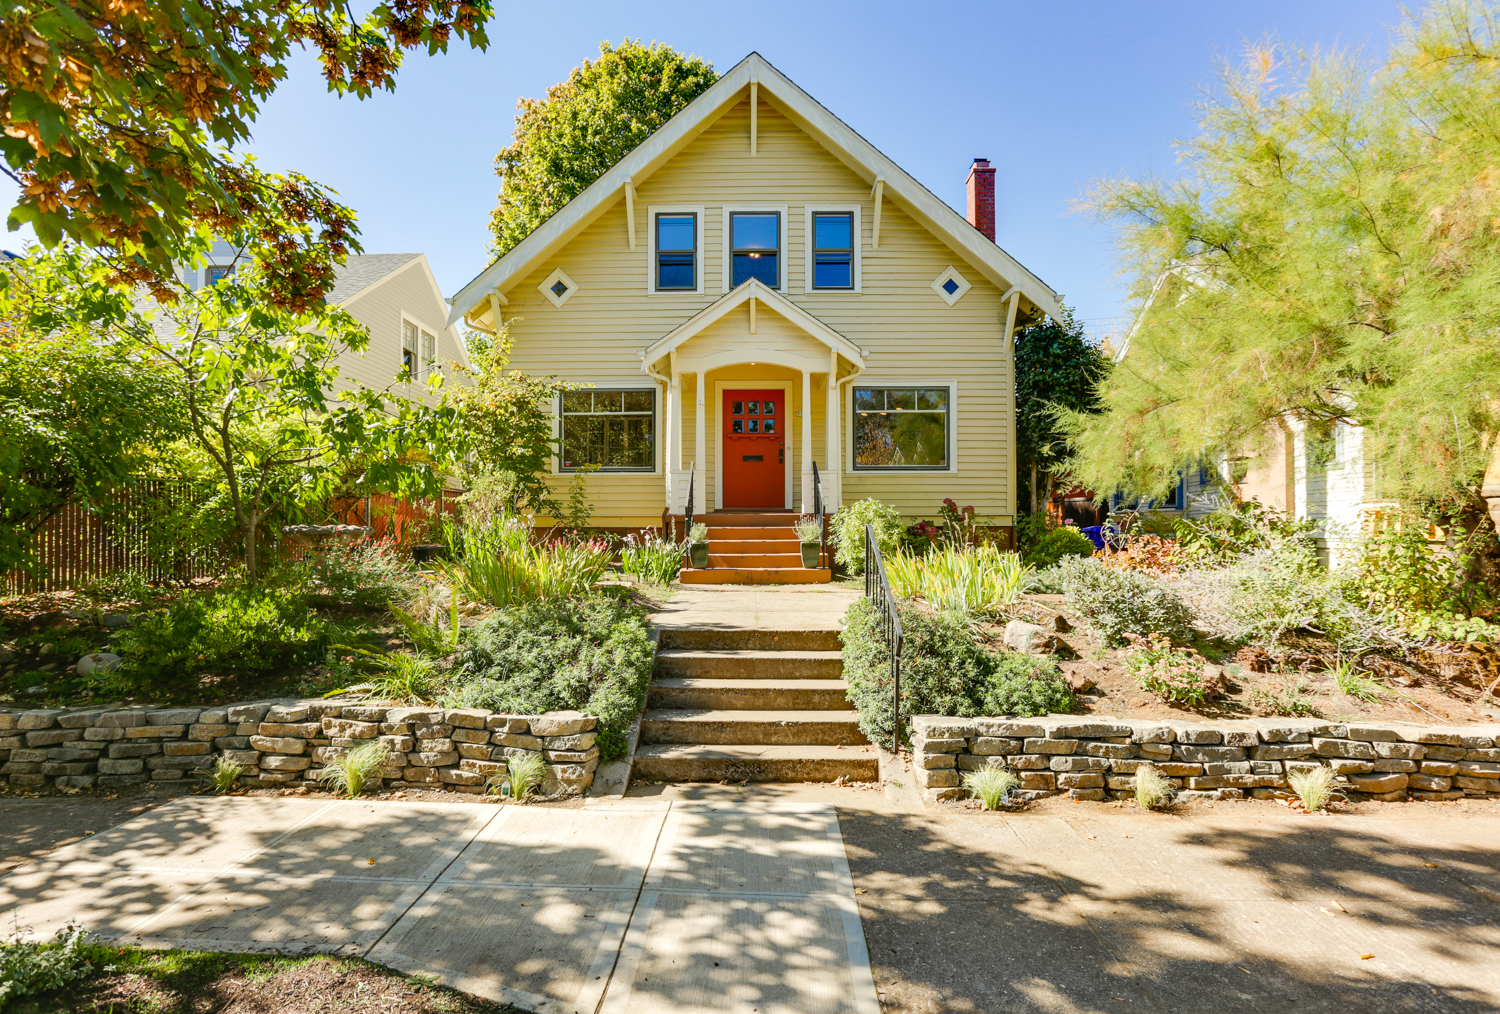 5045 NE Mallory Ave is another example of the Craftsman Style. Built in 1910.